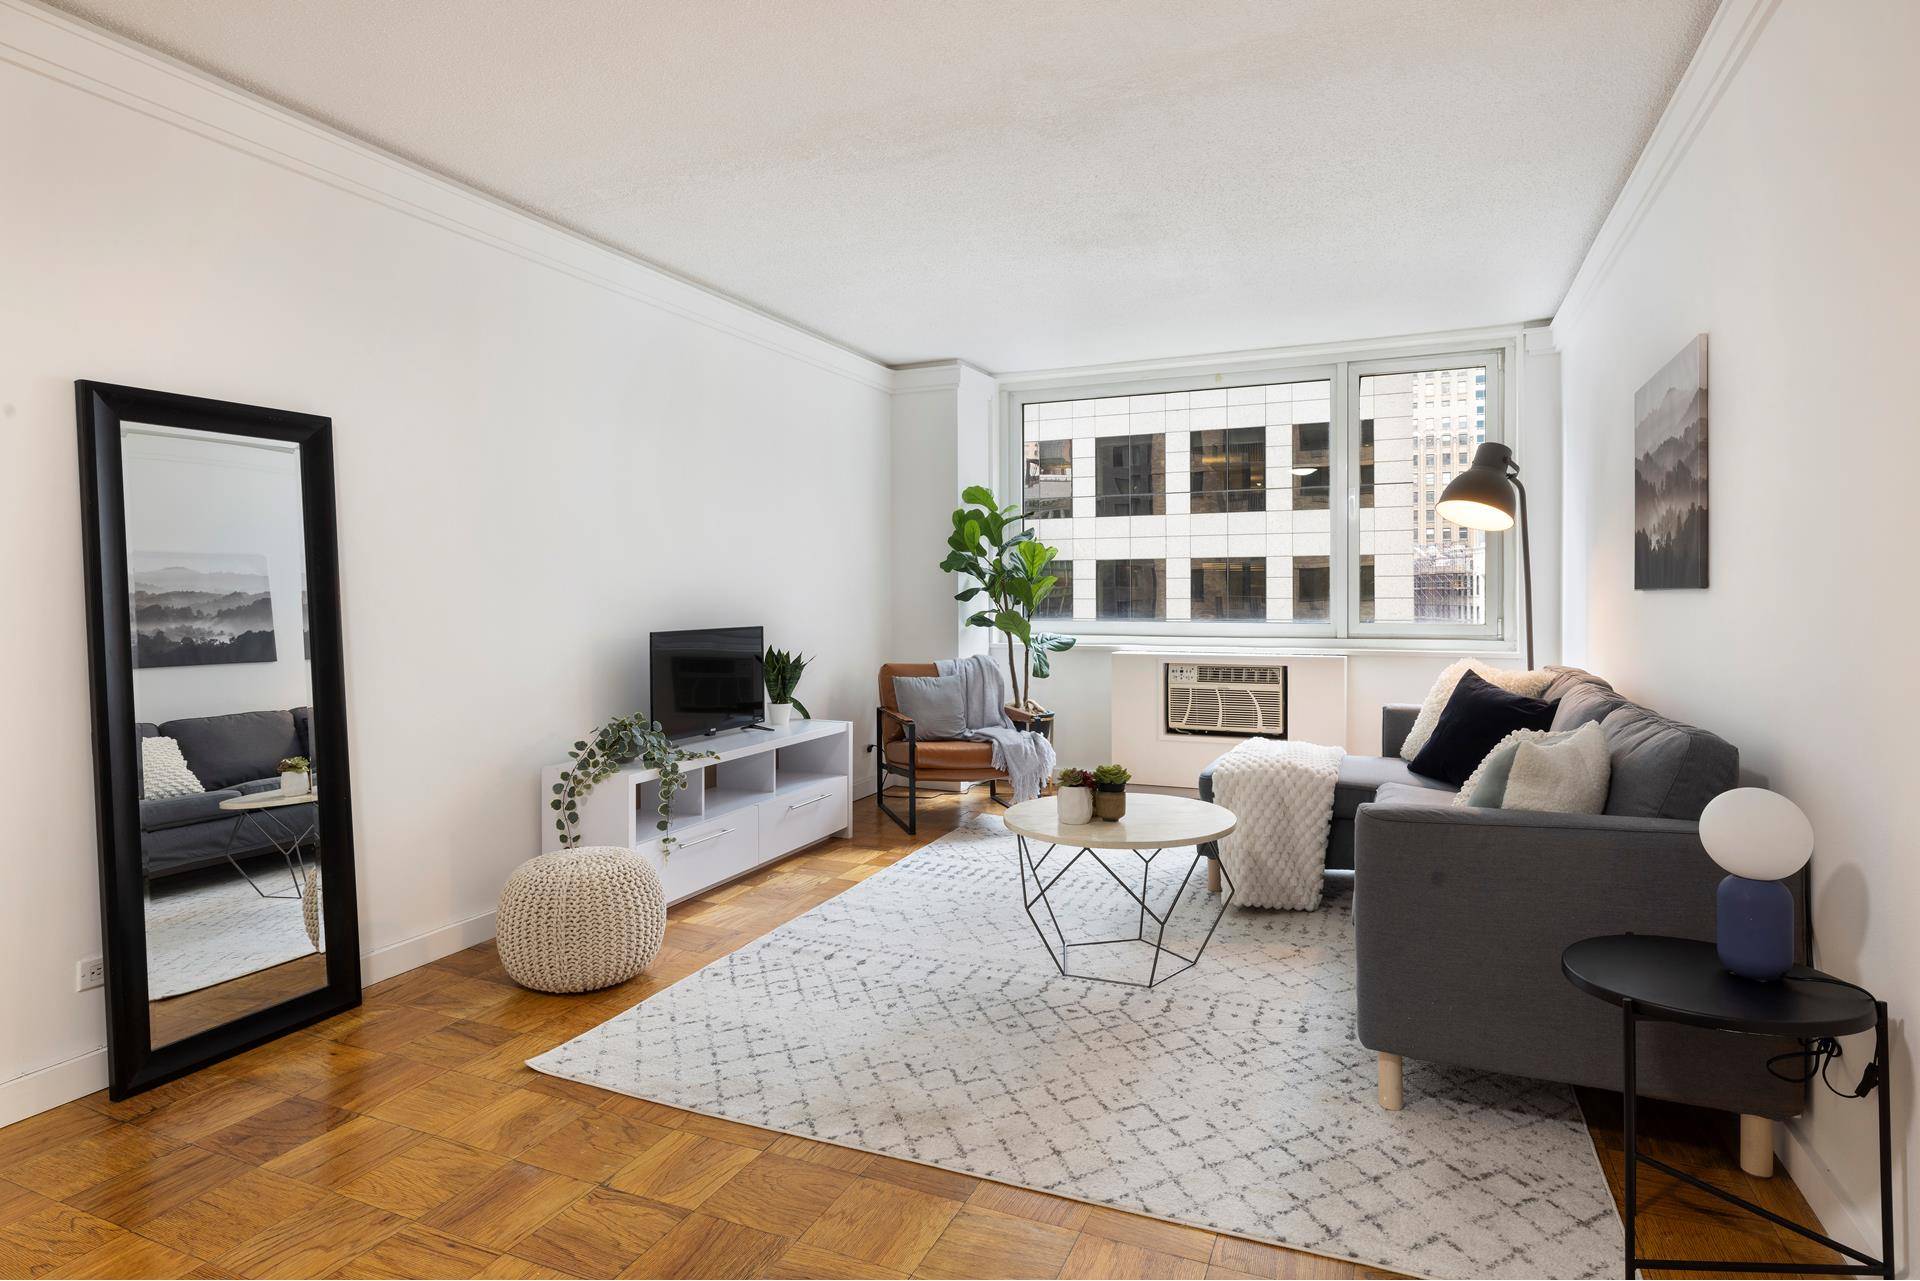 A Spacious one bedroom one bathroom apartment located in a luxury rental building in the heart of Midtown West.